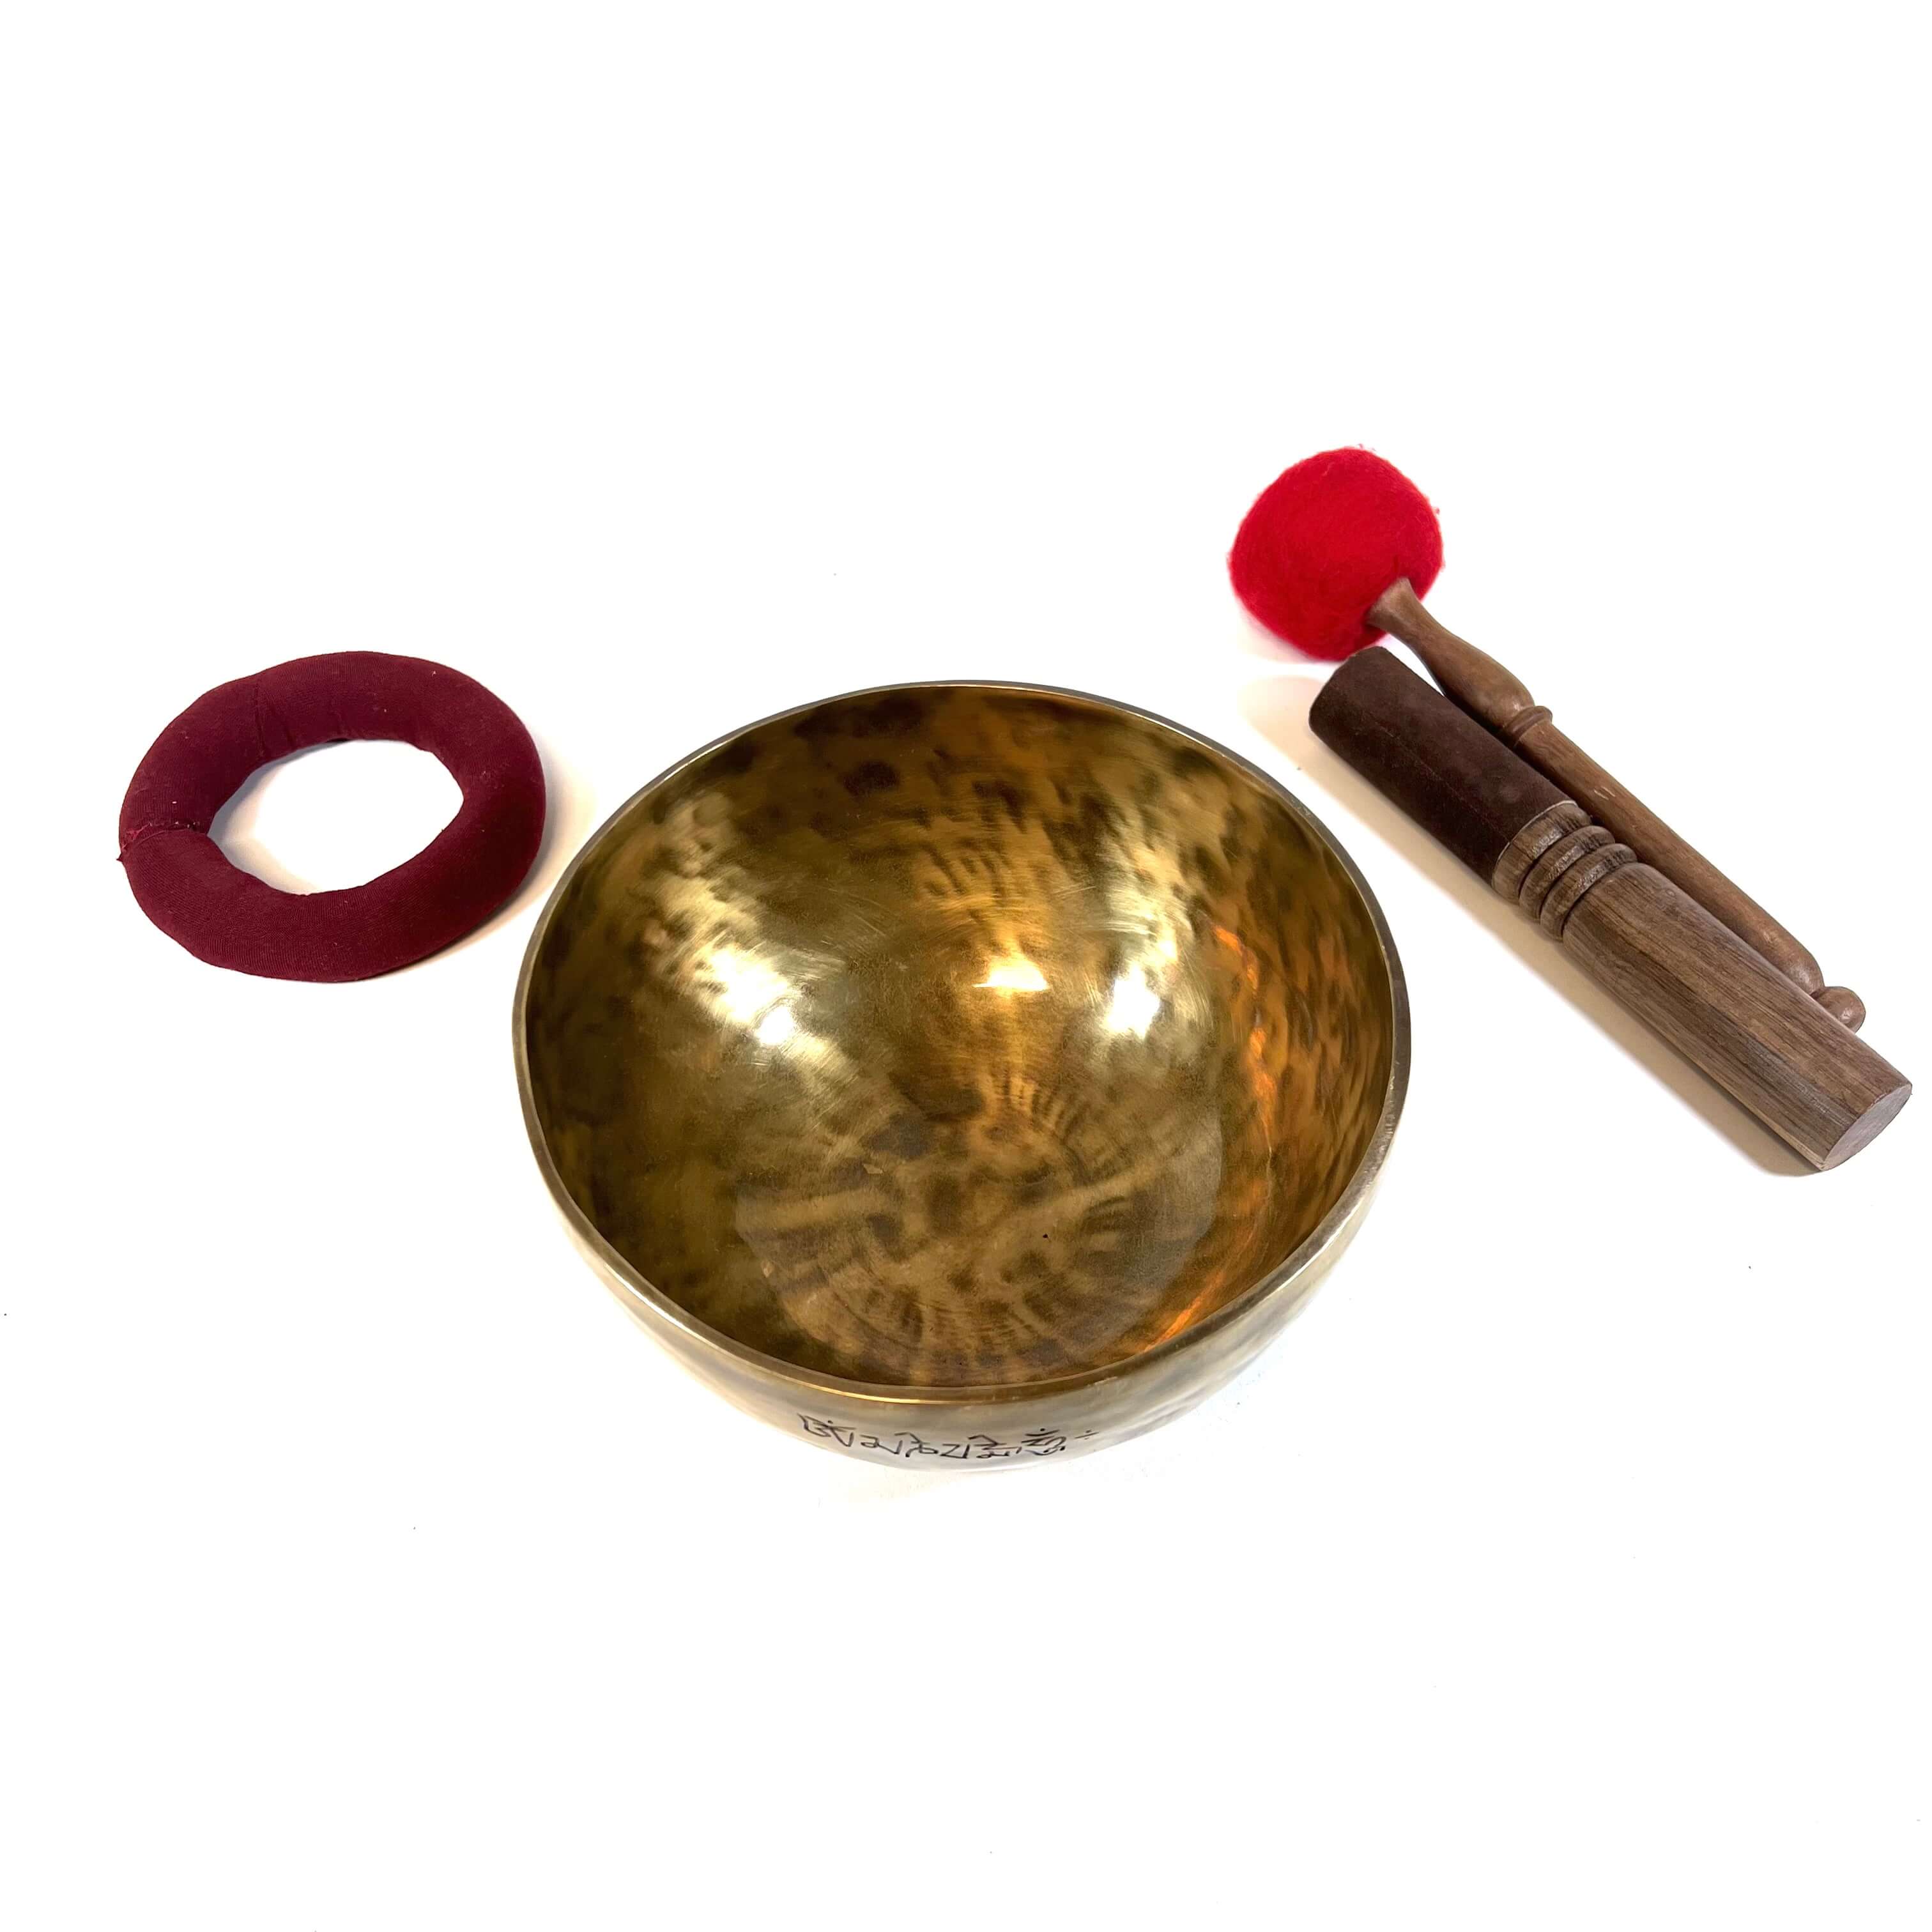 Miscellaneous Singing Bowl Inside